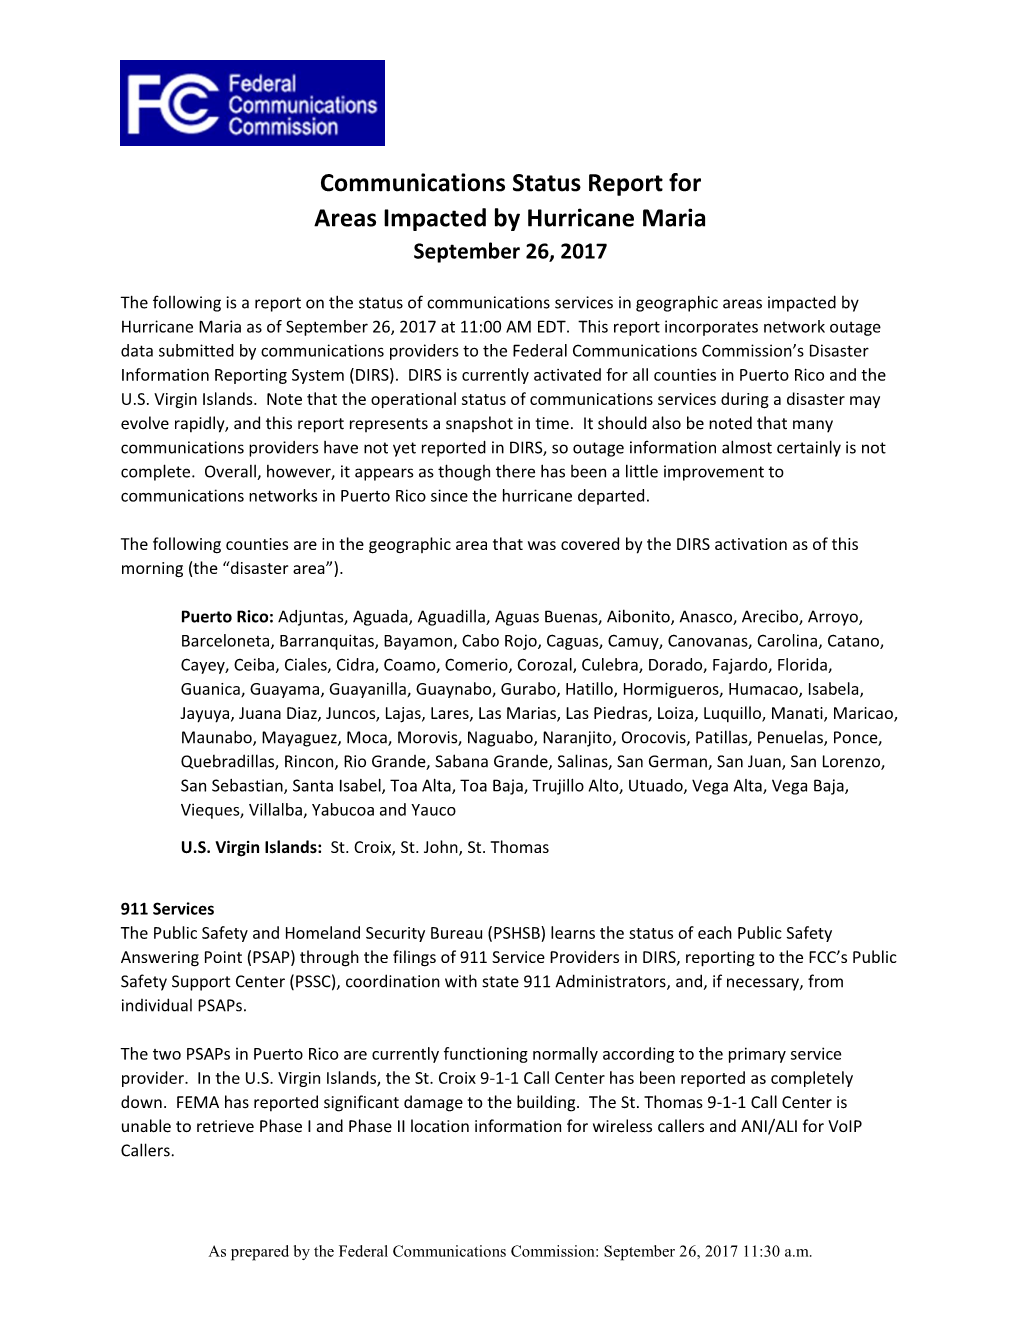 Communications Status Report for Areas Impacted by Hurricane Maria September 26, 2017